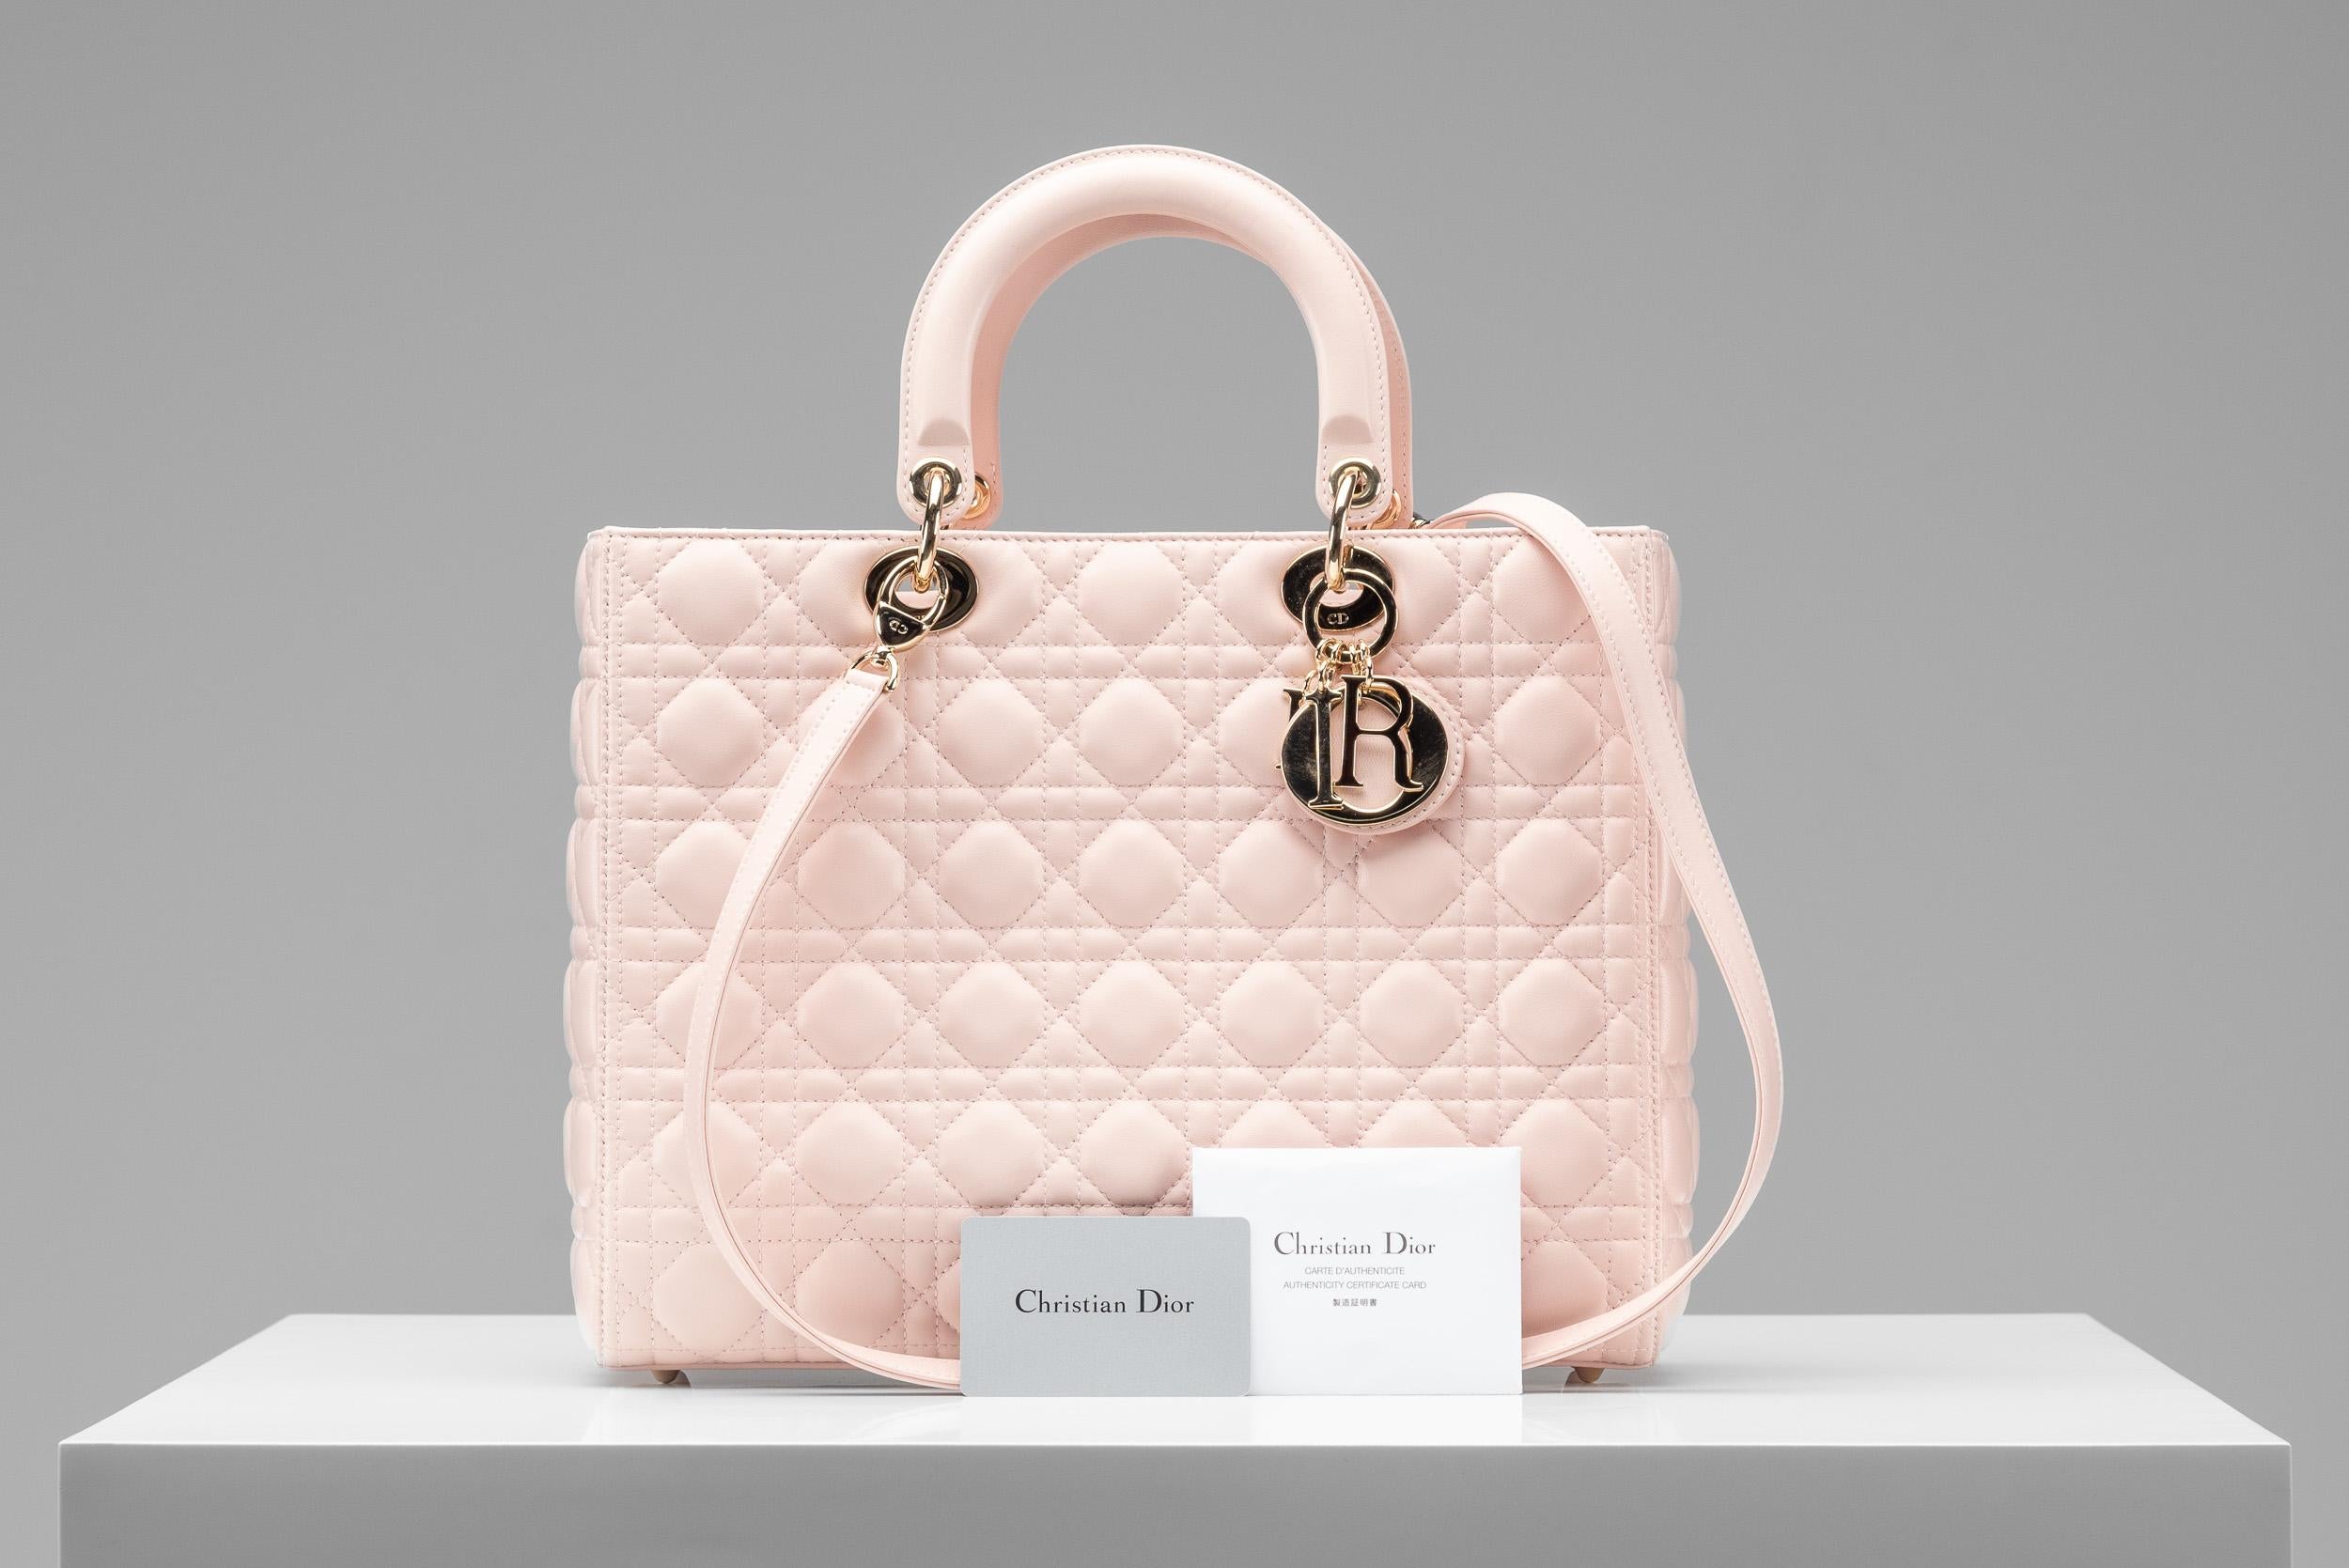 From the collection of SAVINETI we offer this Lady Dior Bag:
- Brand: Dior
- Model: Lady Dior Large 
- Color: Light Pink 
- Year: 2013
- Condition: Excellent
- Materials: lambskin leather, Gold-Tone hardware
- Extras: authenticity card

Authenticity